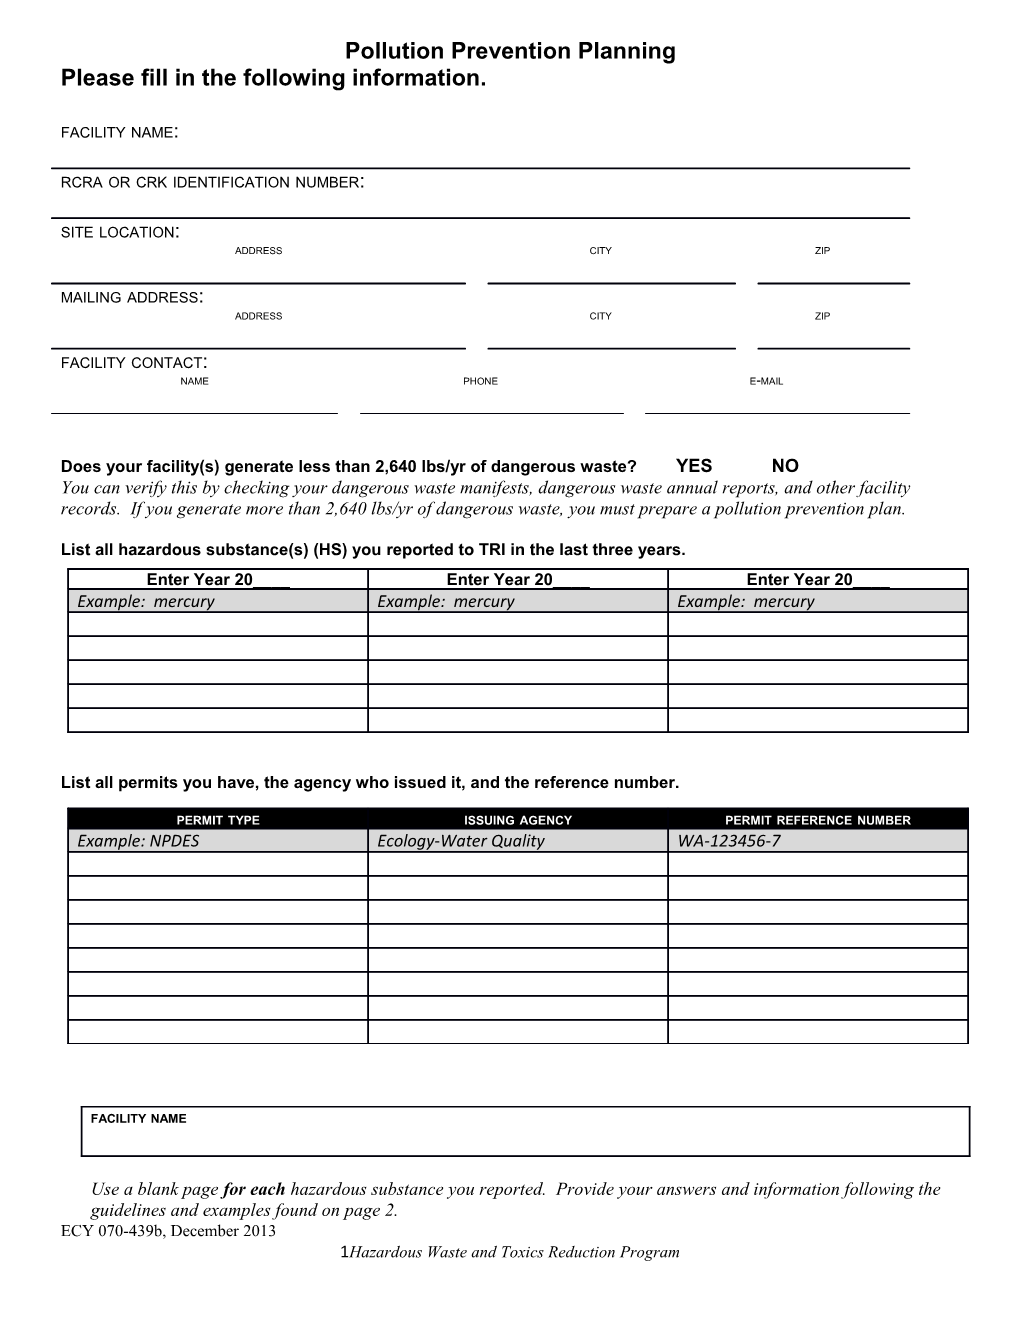 Please Fill in the Following Information